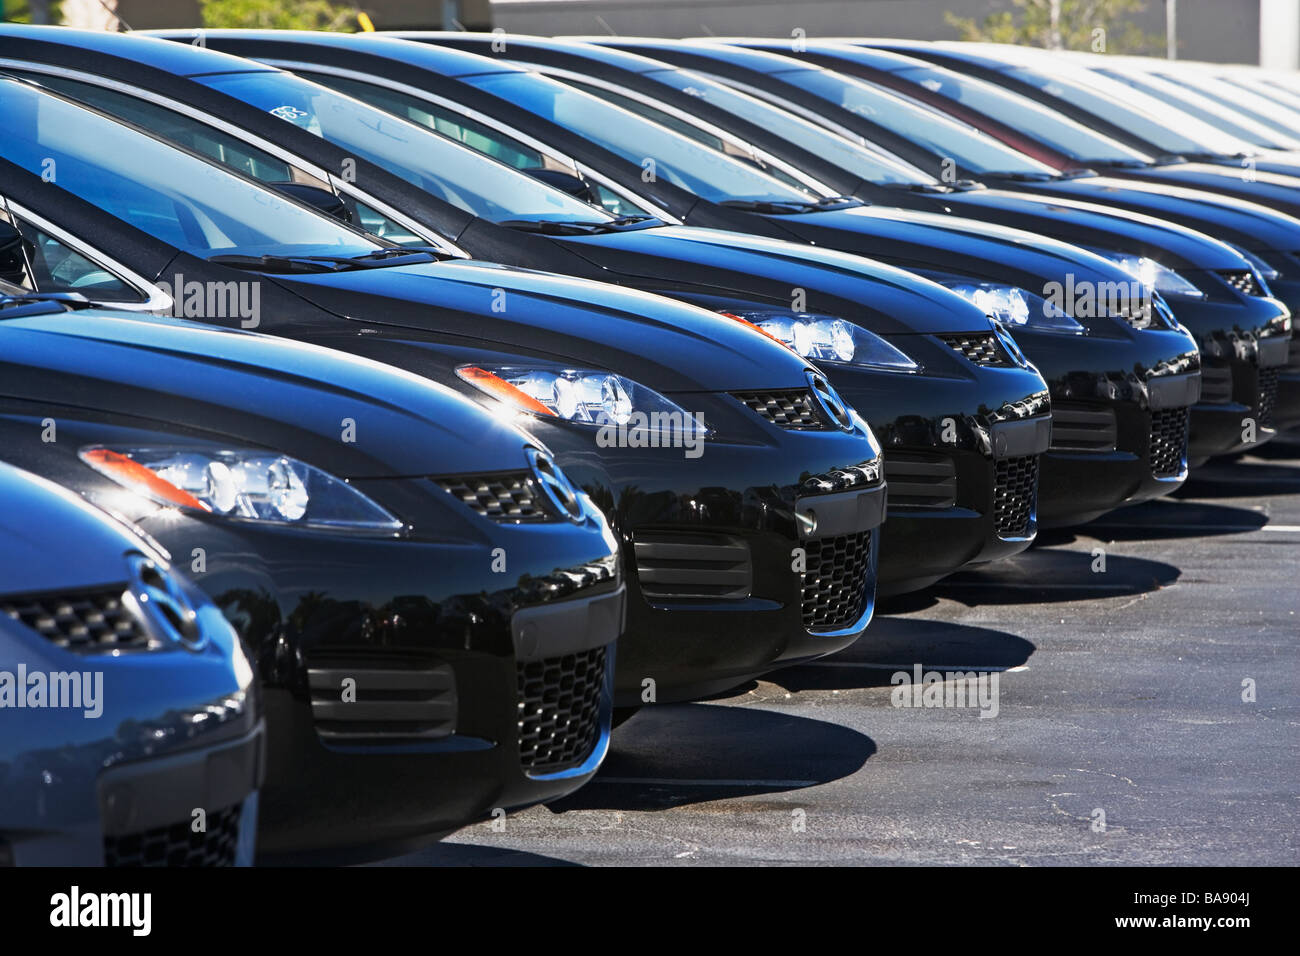 Row of cars in car lot Stock Photo